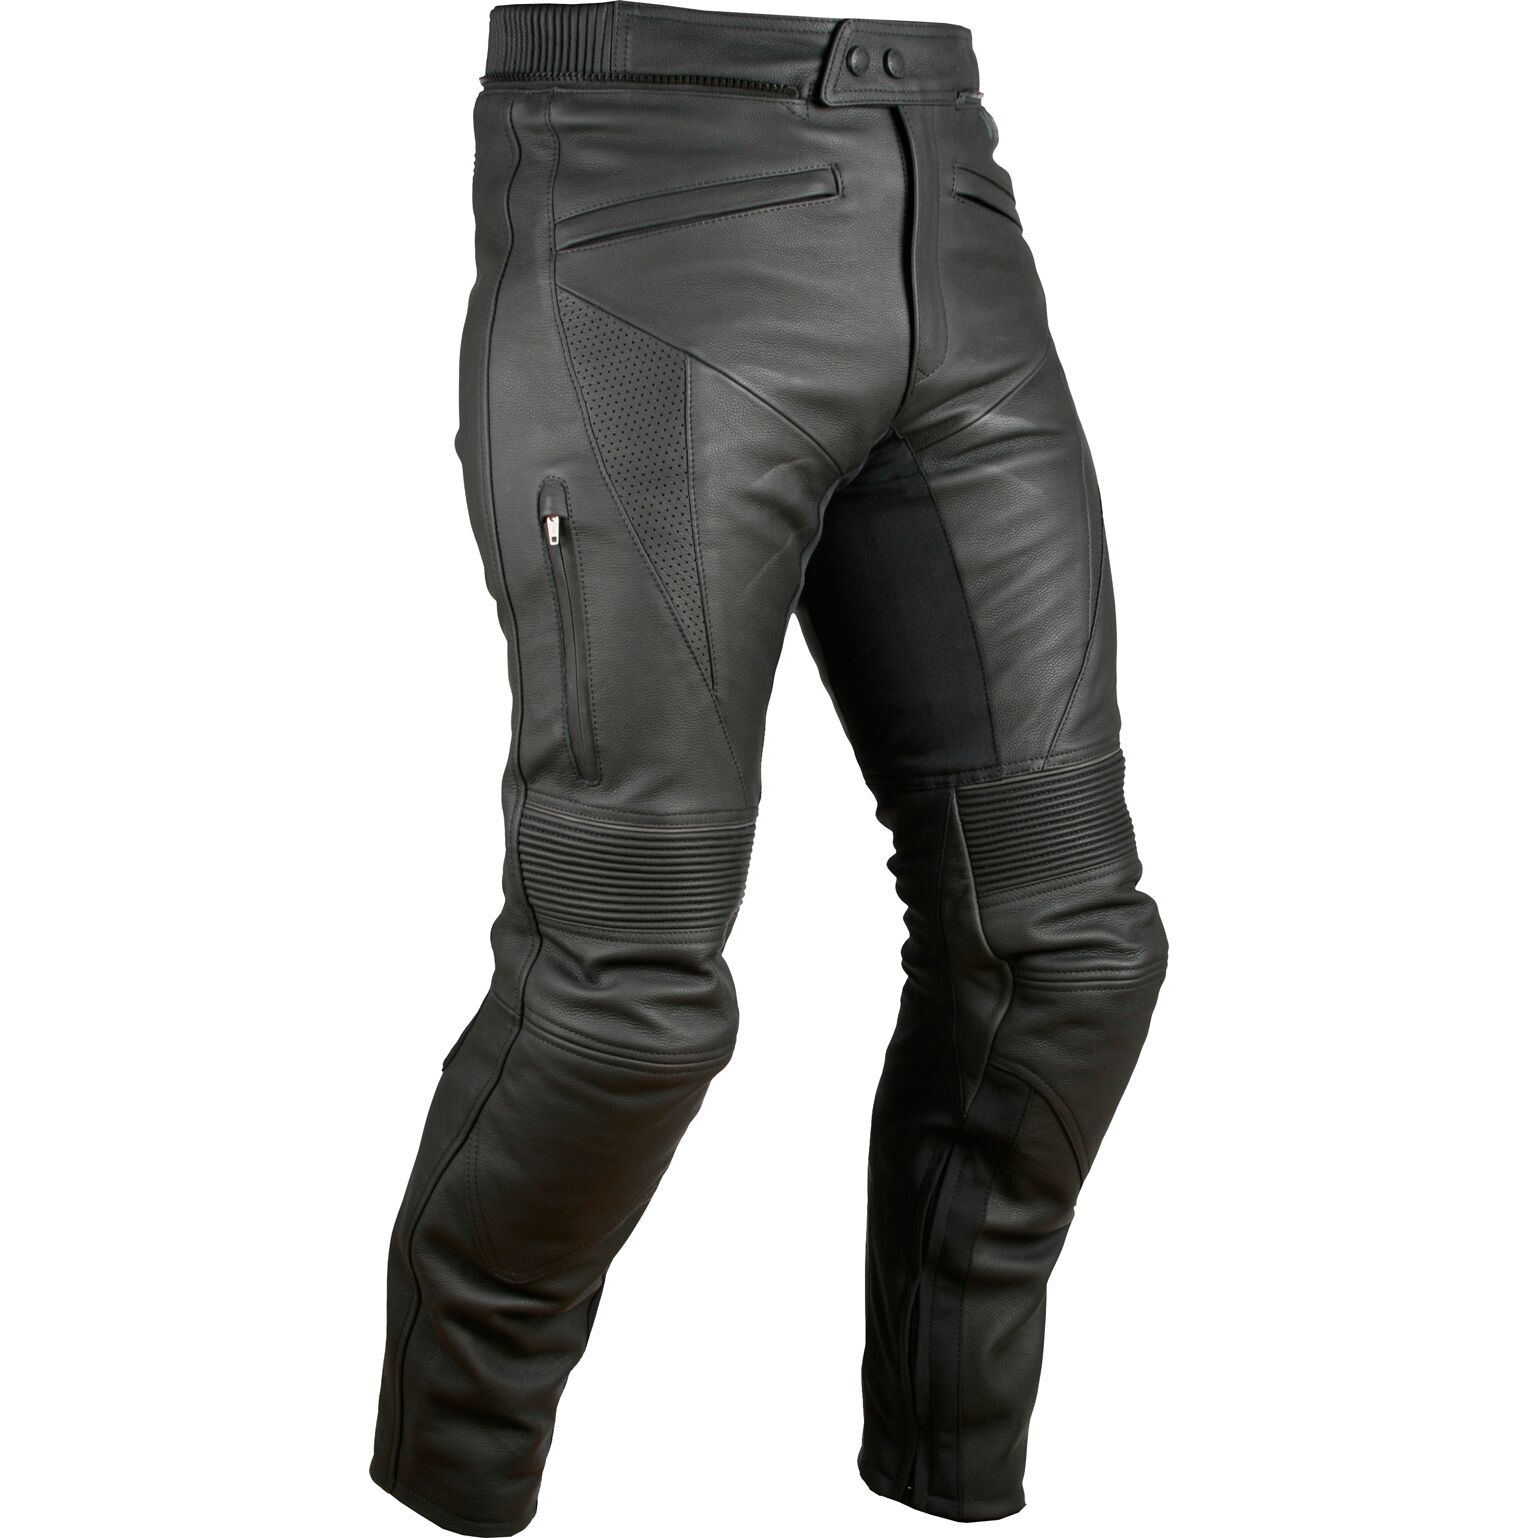 Weise Hydra Leather Waterproof Jeans | FREE UK DELIVERY